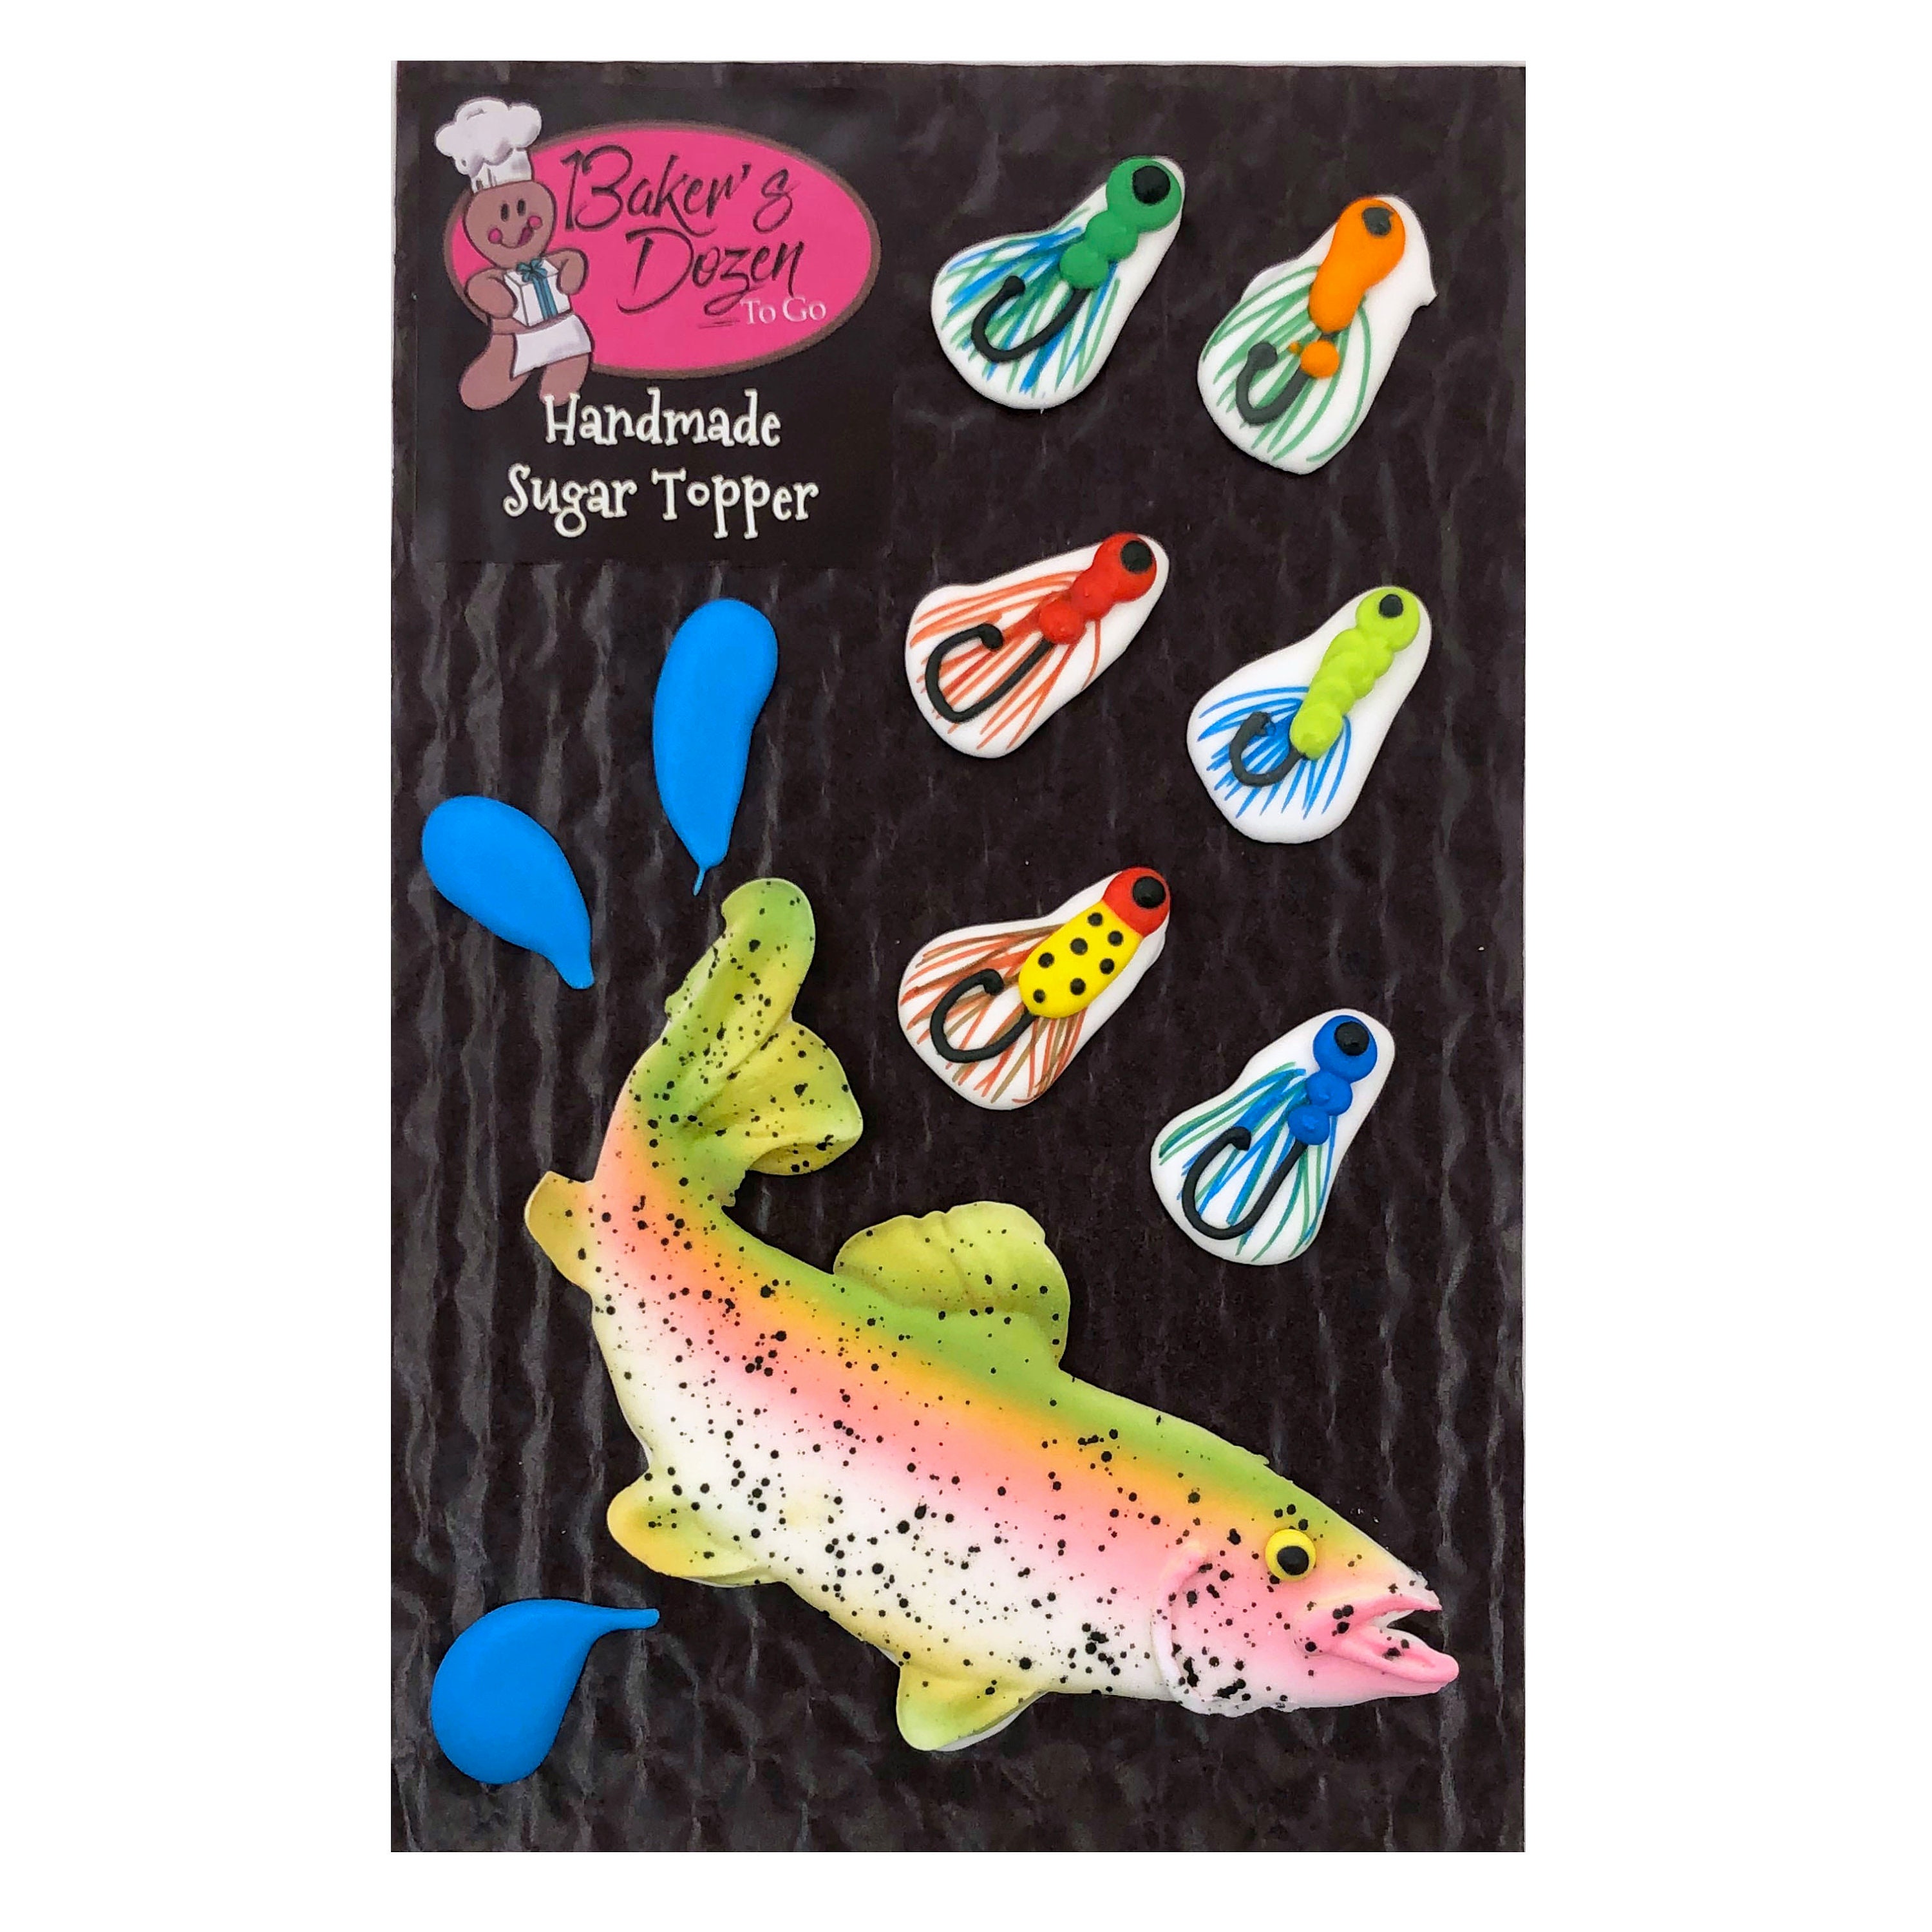 Jumping Rainbow Trout 10 Pcs Fish and Fly Fishing Lures Edible Royal Icing  Cake Topper Cupcake Decoration Handmade by Bakersdozentogo 